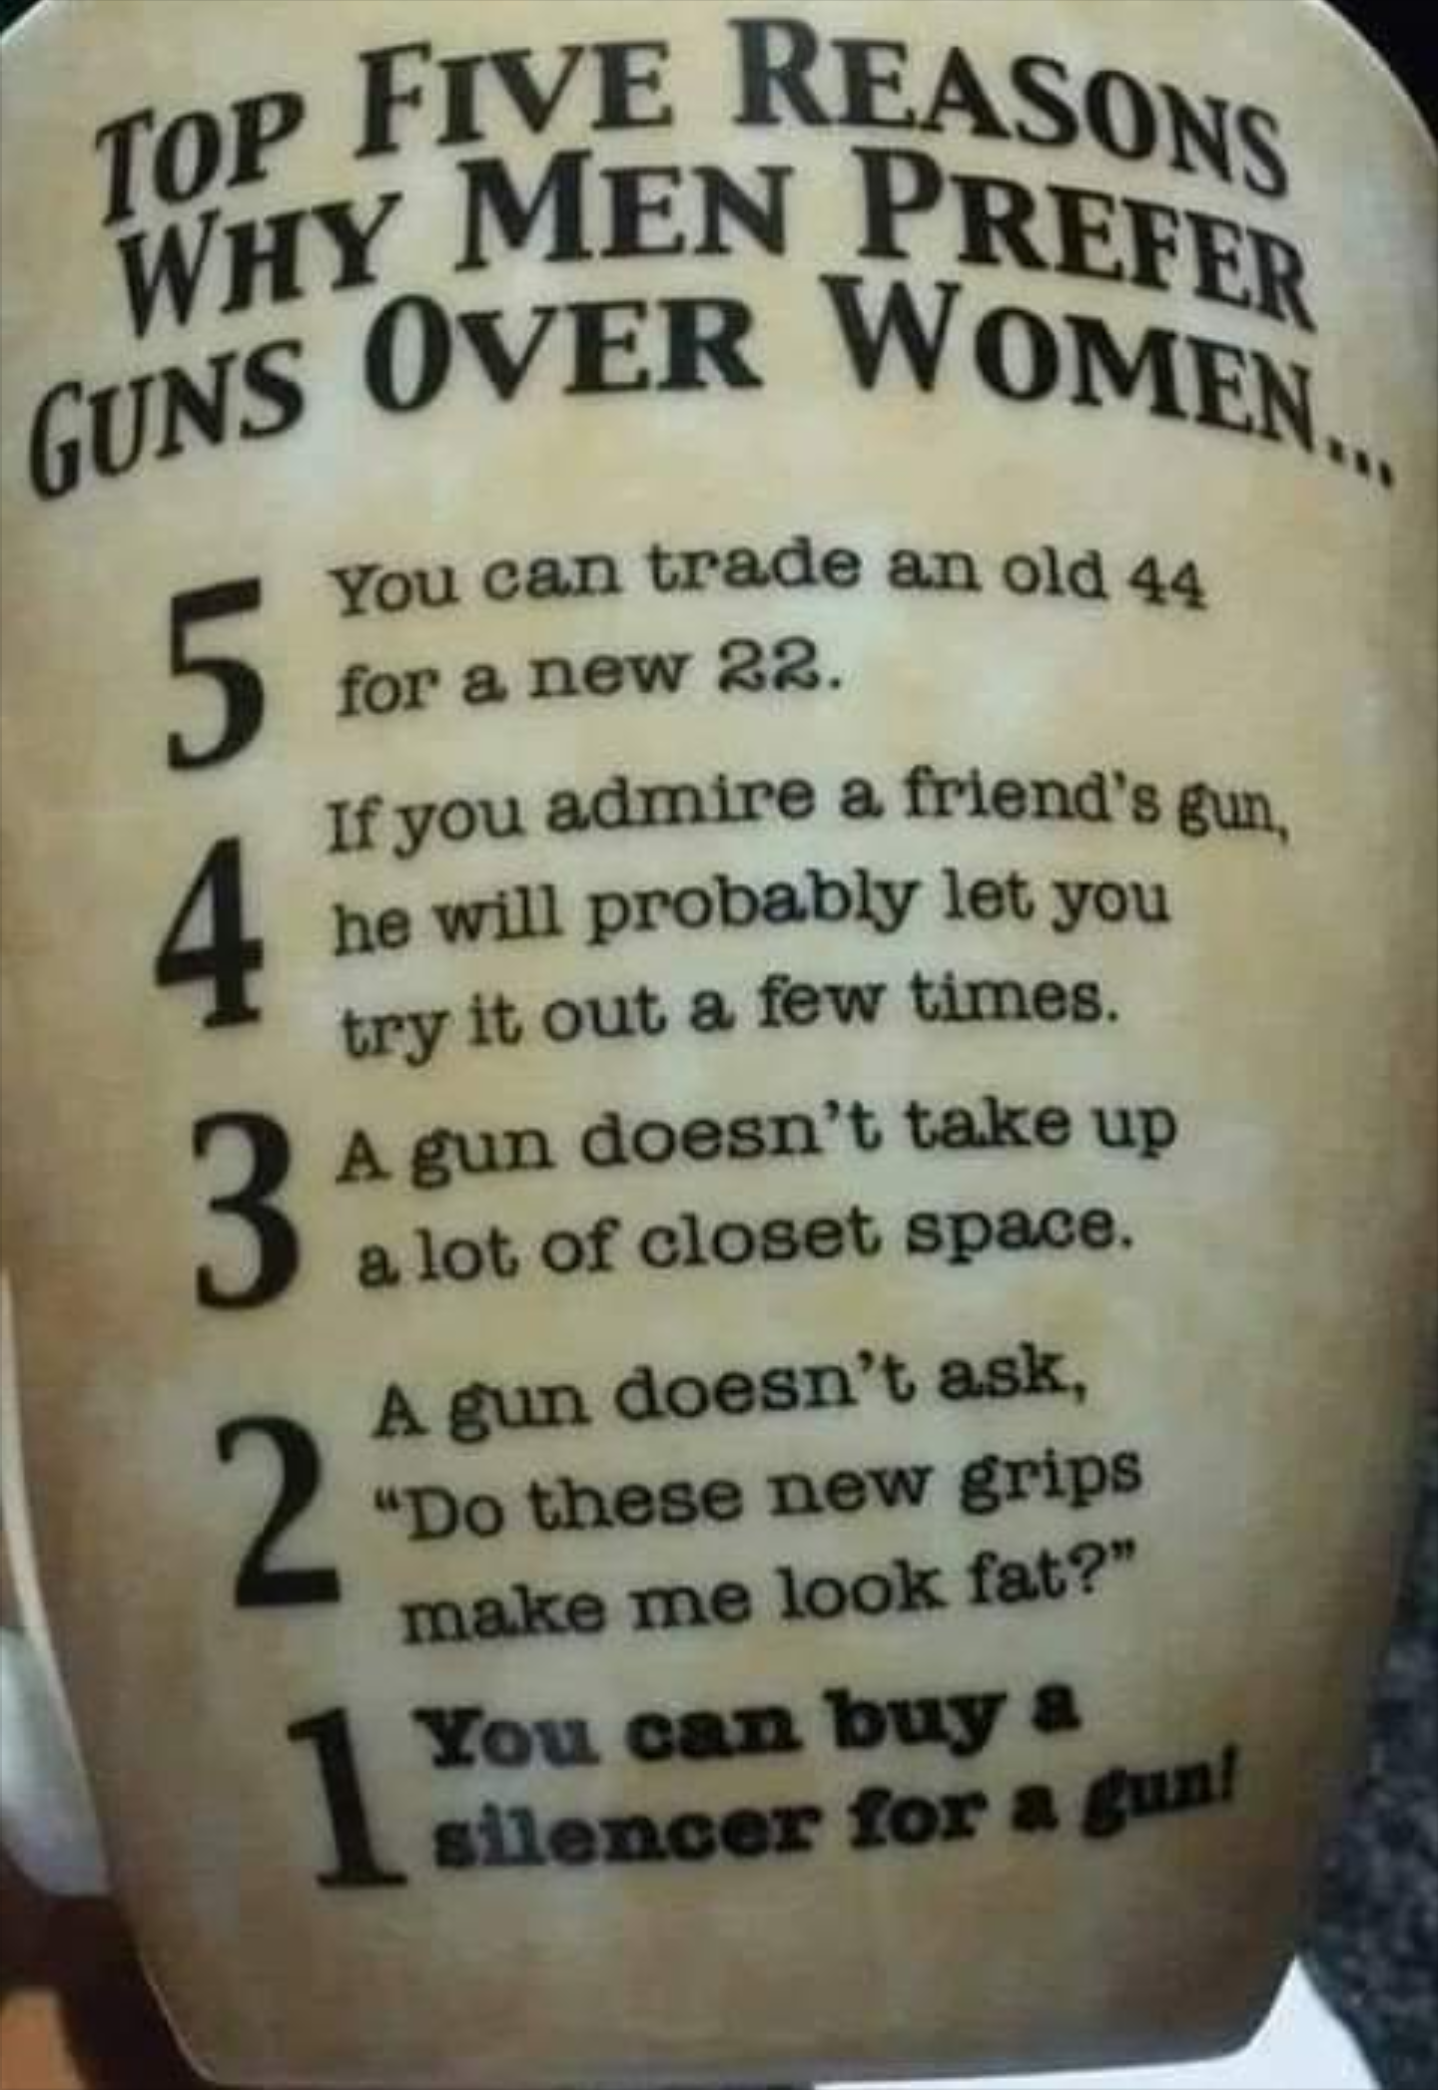 label - Top Five Op Five Reasons Why Men Prees Er Women Guns Over Wo You can trade an old 44 for a new 22. If you admire a friend's gun he will probably let you try it out a few times. A gun doesn't take up a lot of closet space. A gun doesn't ask, "Do th